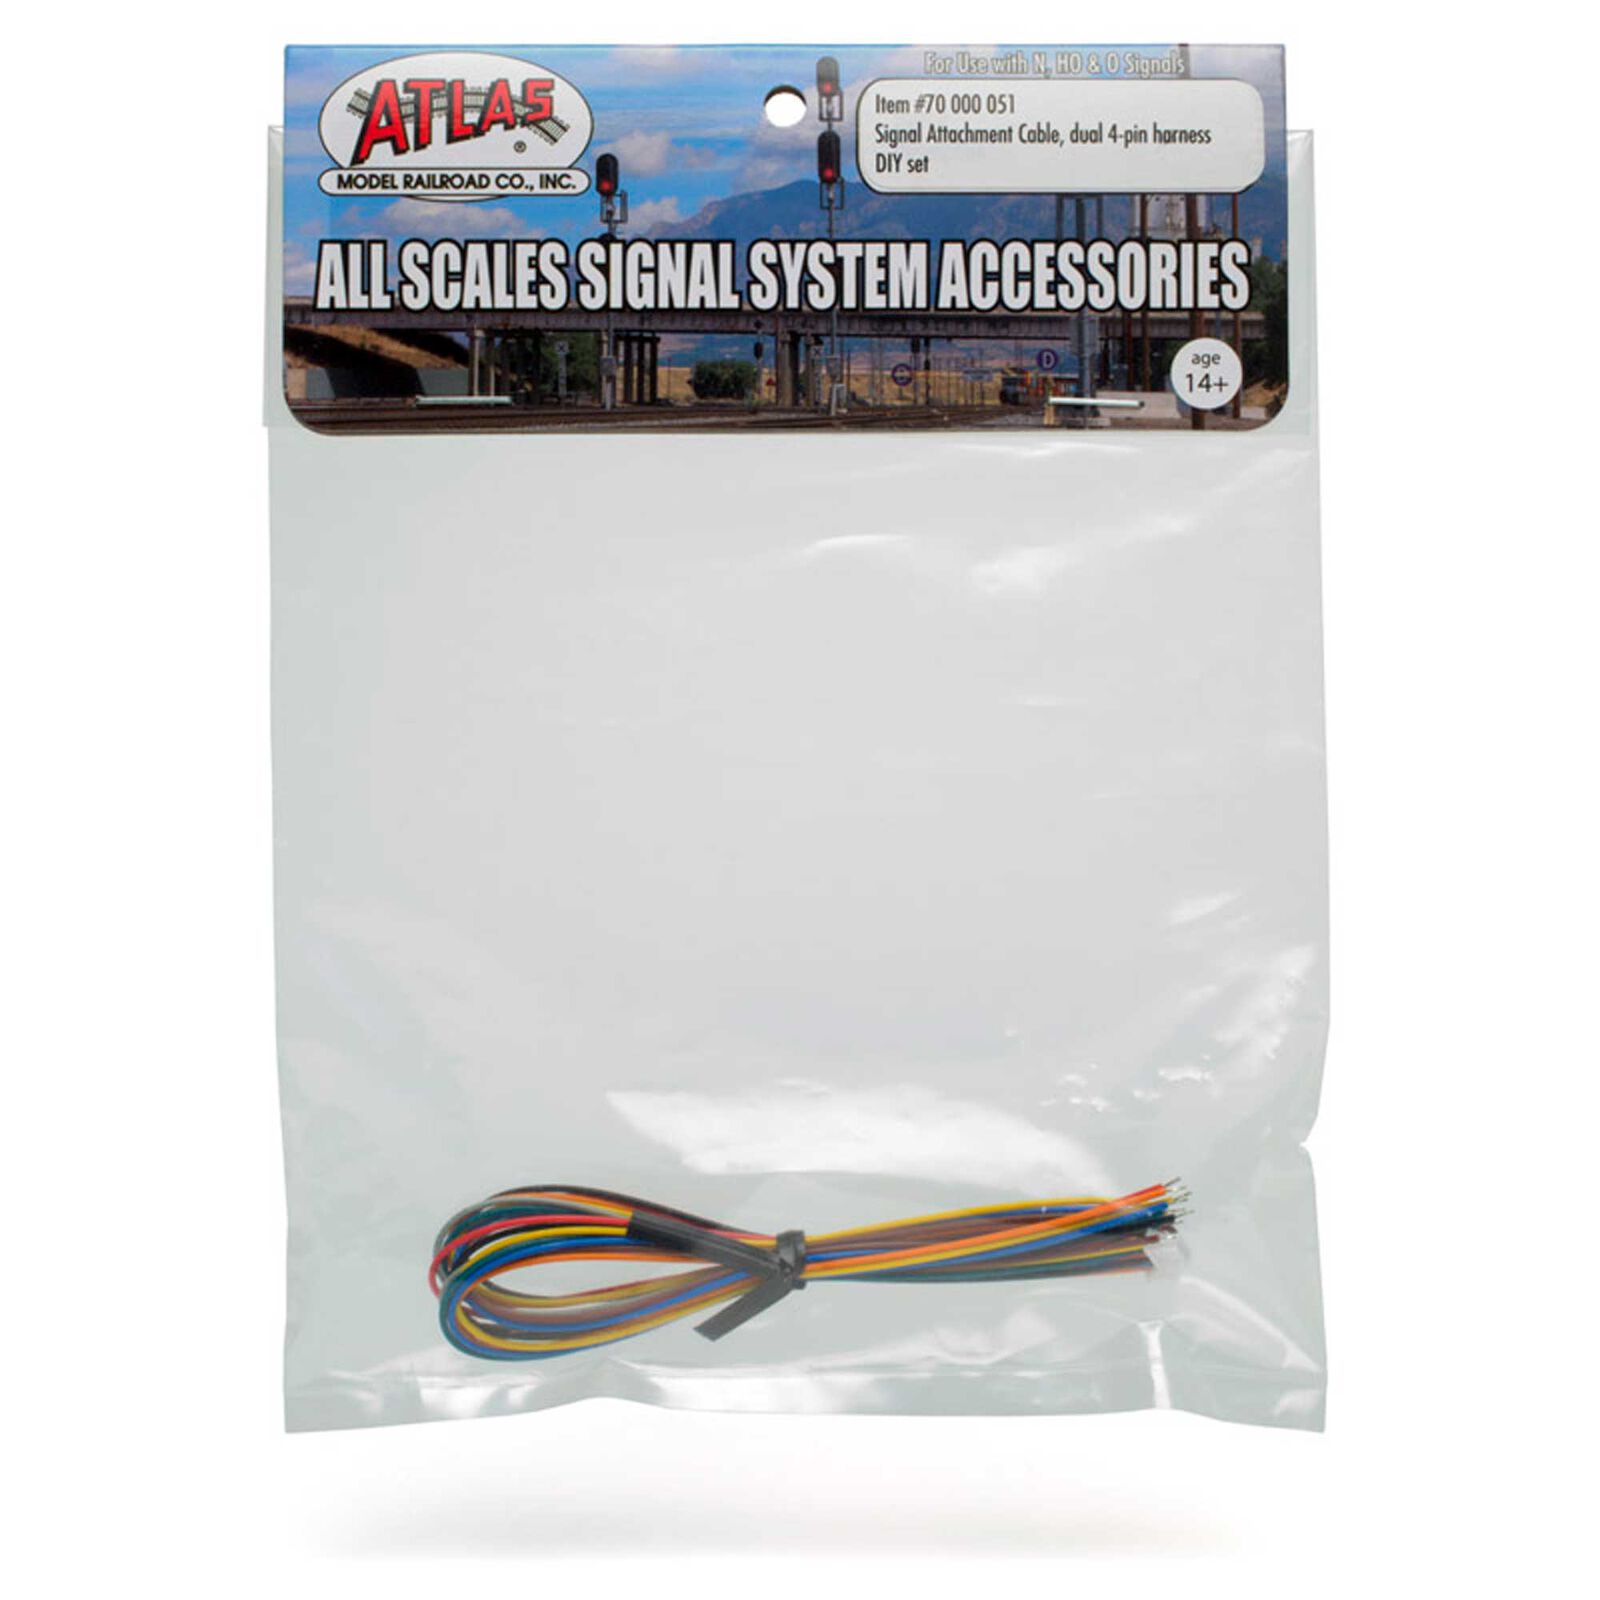 Signal Attachement Cable Dual 4-Pin Harness DIY